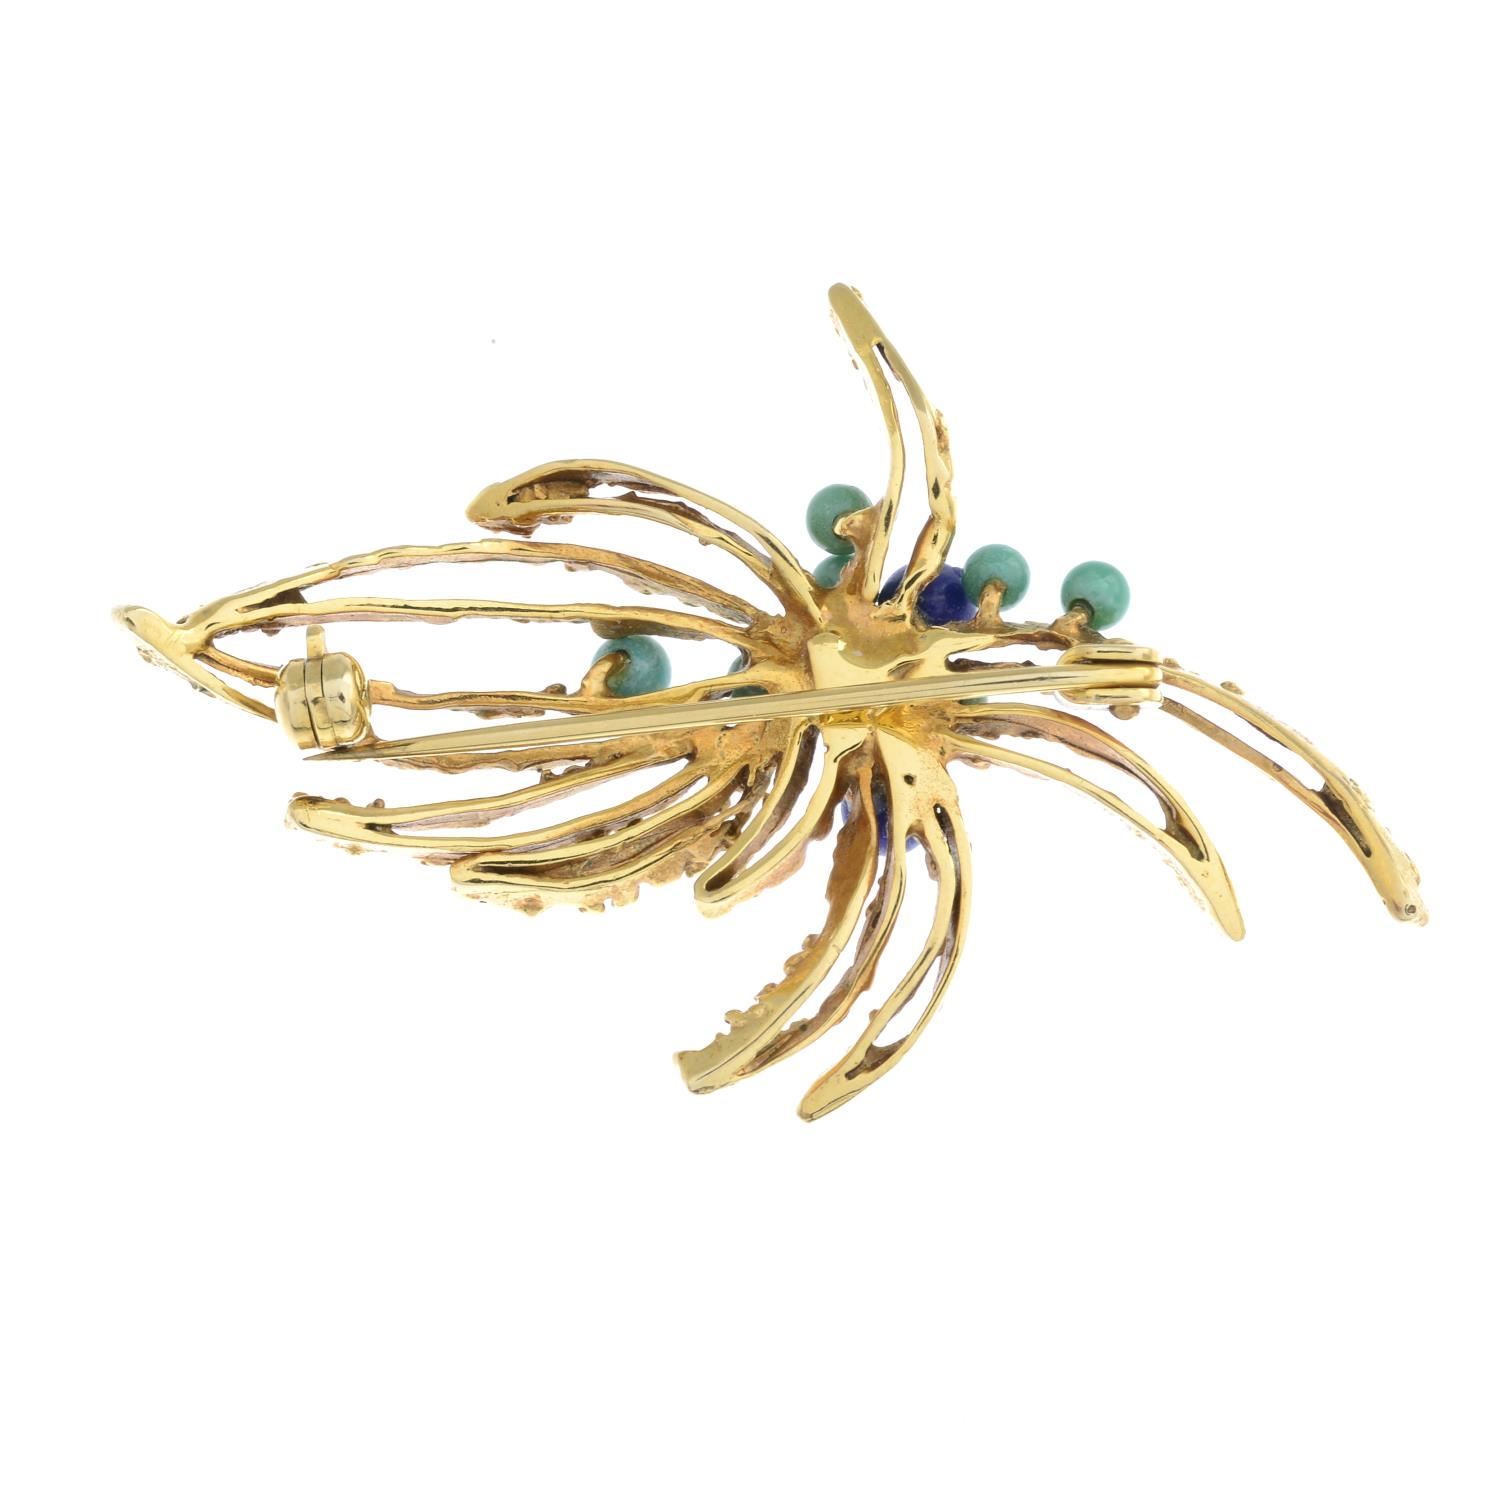 A 1960s 9ct gold amazonite and lapis lazuli bead textured brooch.Import marks for London, 1968. - Image 2 of 2